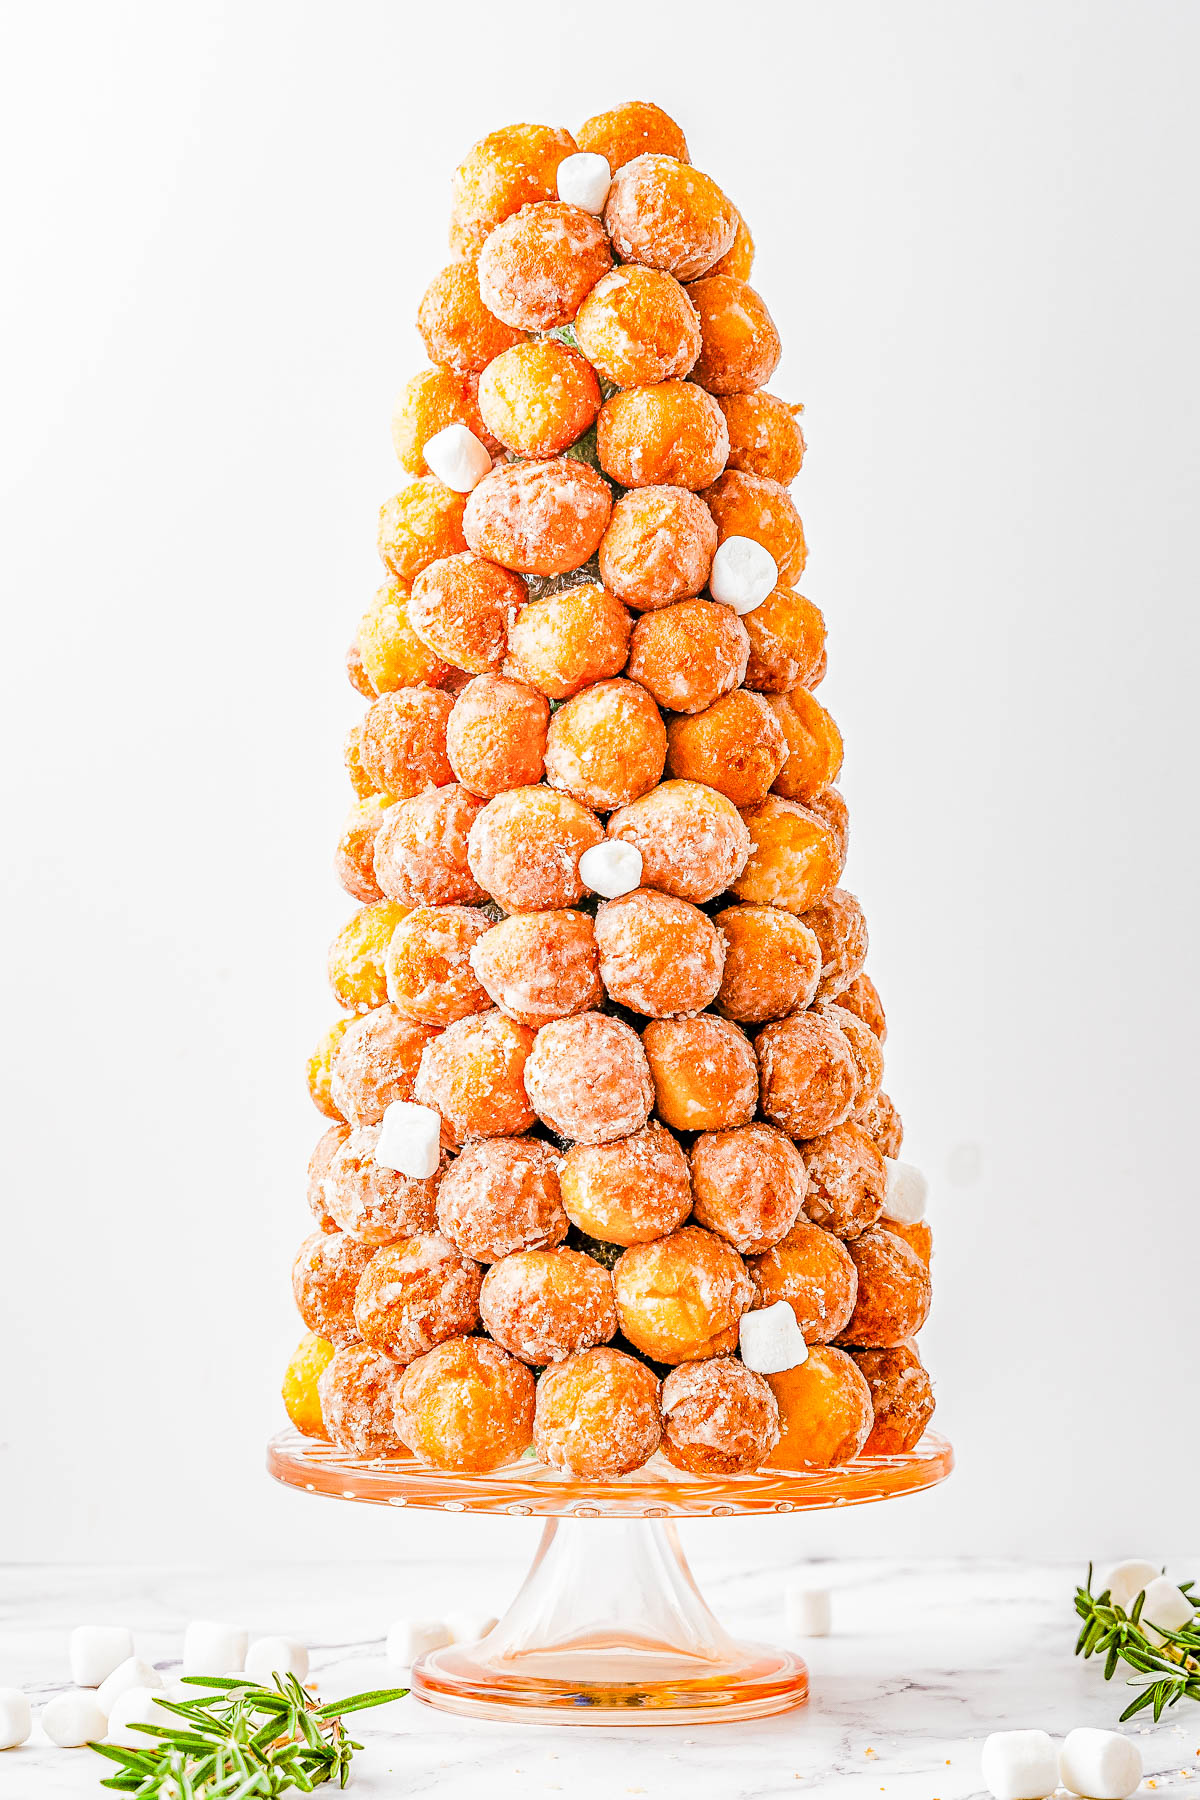 Donut Hole Christmas Tree — Looking for a QUICK and EASY, yet FESTIVE centerpiece for your holiday dessert table or brunch spread? Try making a Christmas tree out of donut holes! All you need is a styrofoam cone from the craft store and some store-bought donut holes. Decorate your tree however you want, then let guests help themselves!   